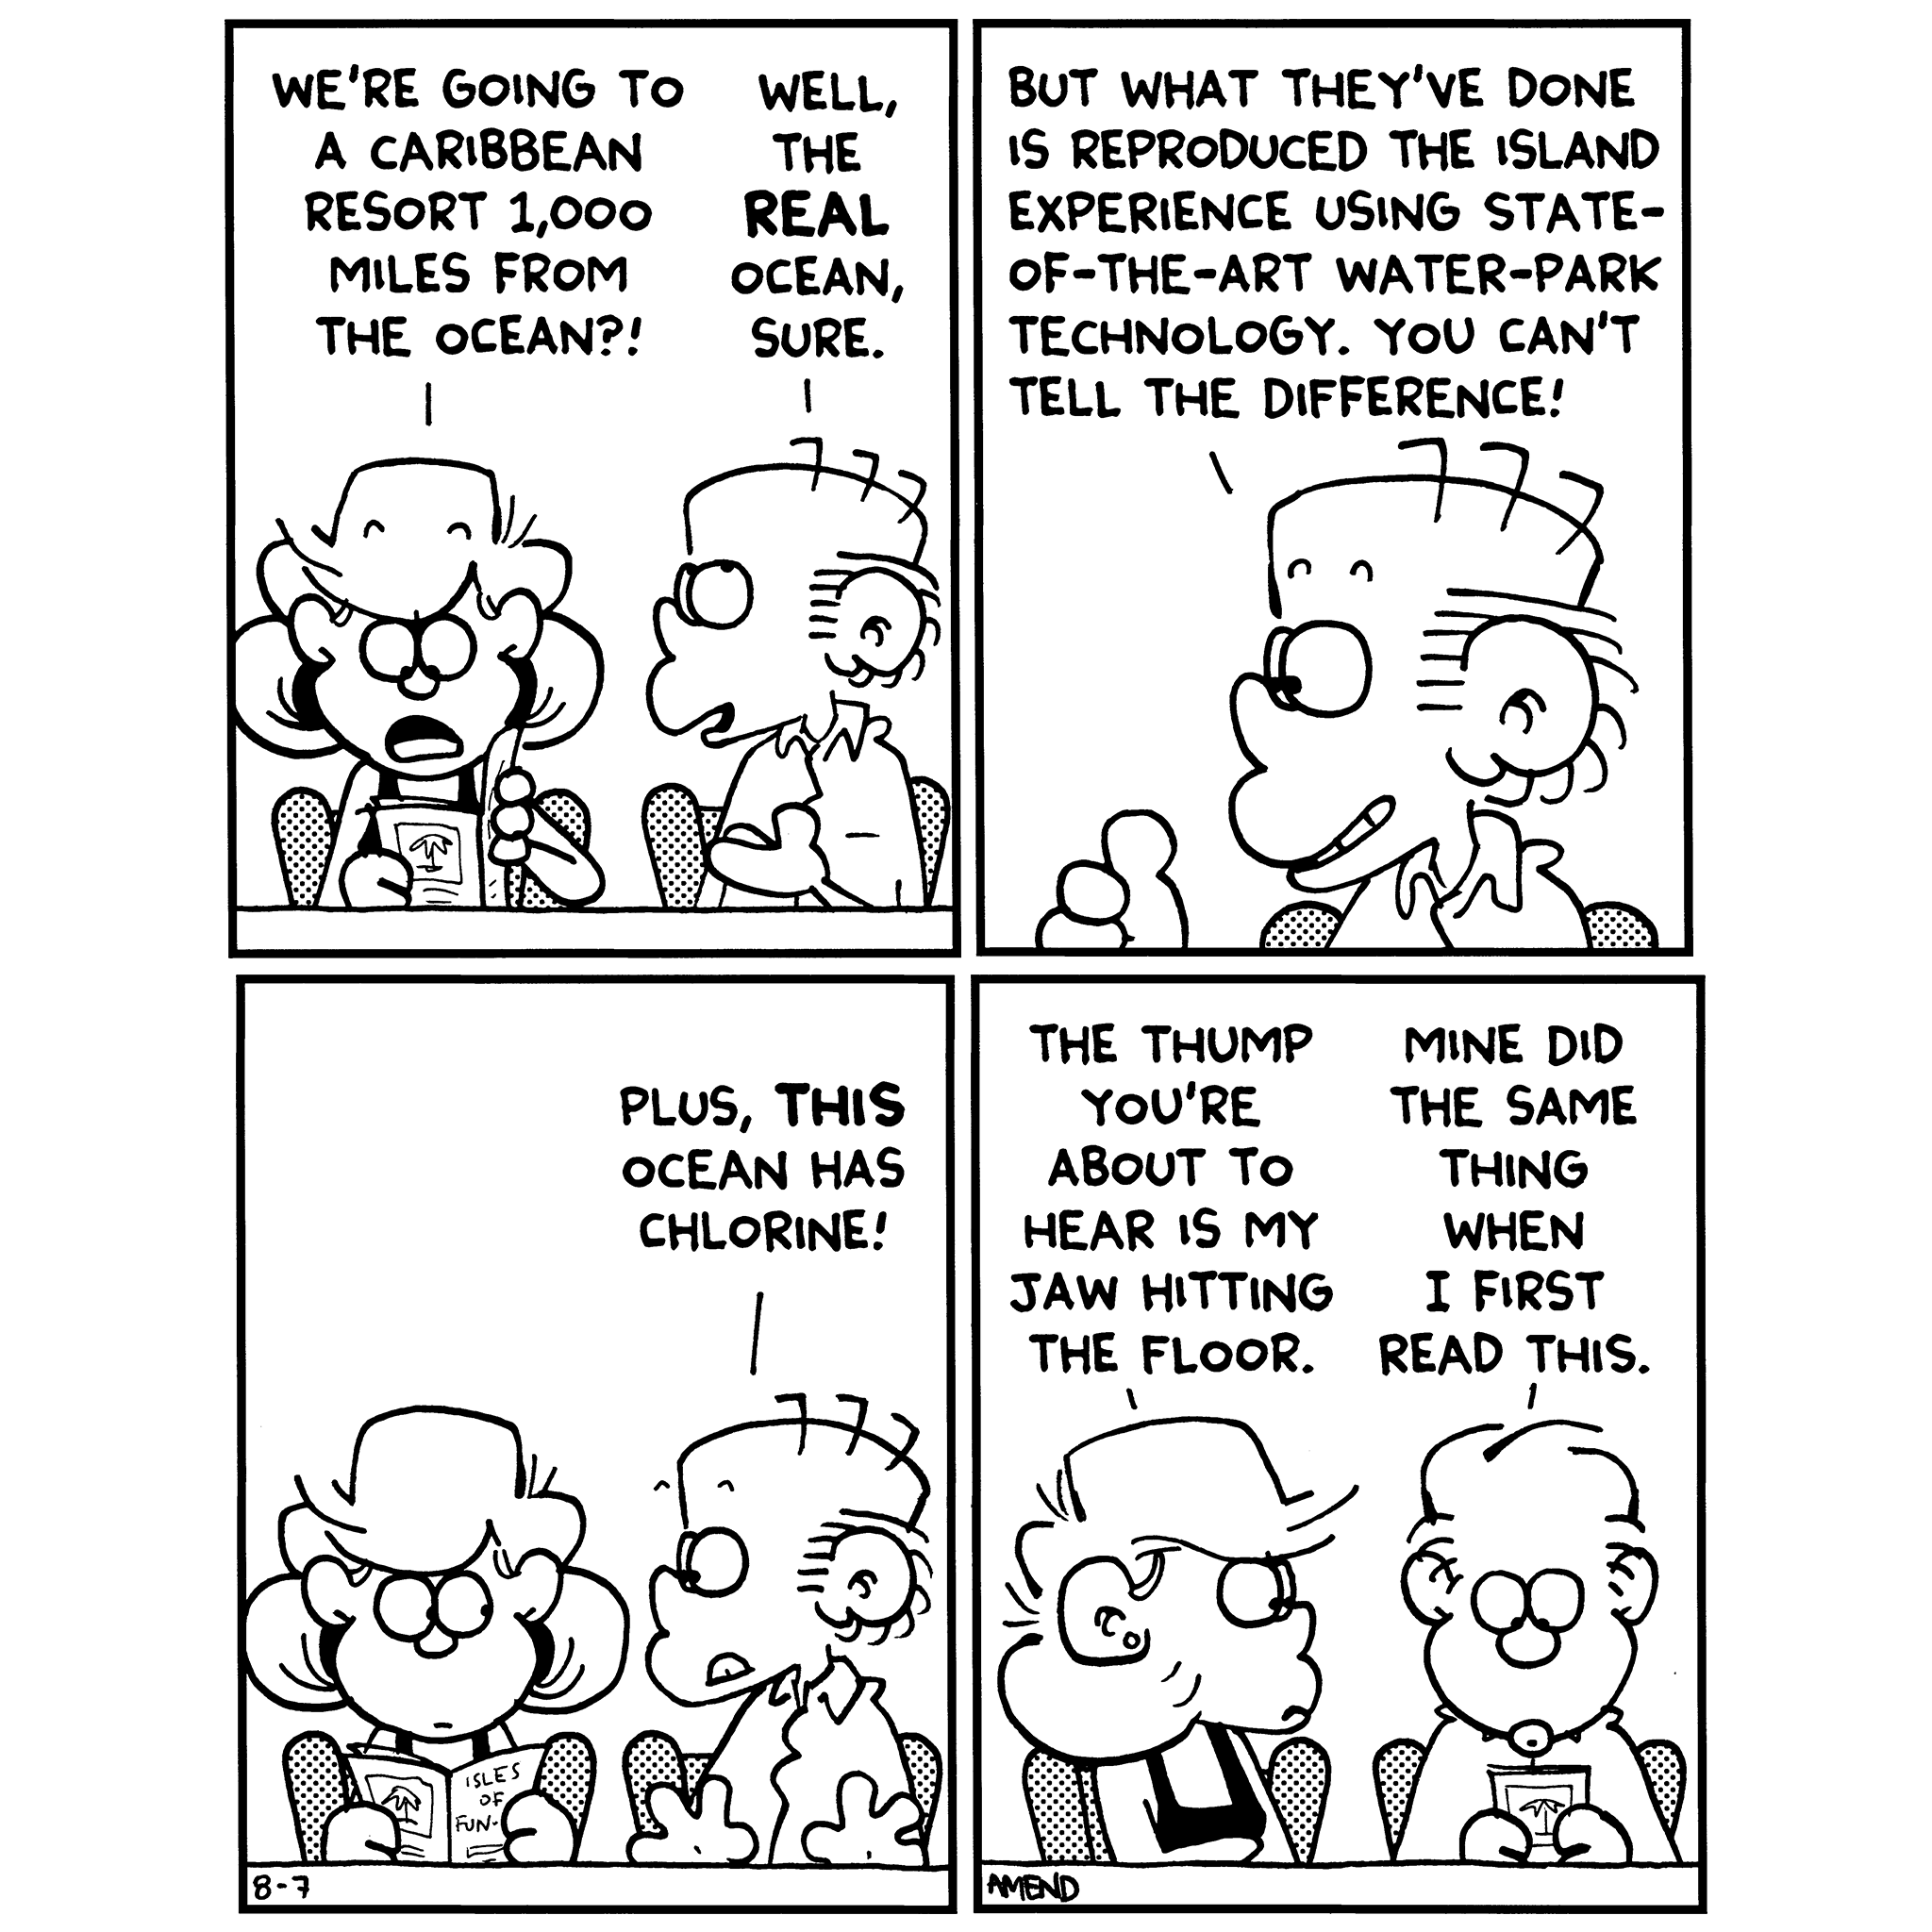 FoxTrot comic strip by Bill Amend - August 7, 2001 - Caribbeanny Vacation